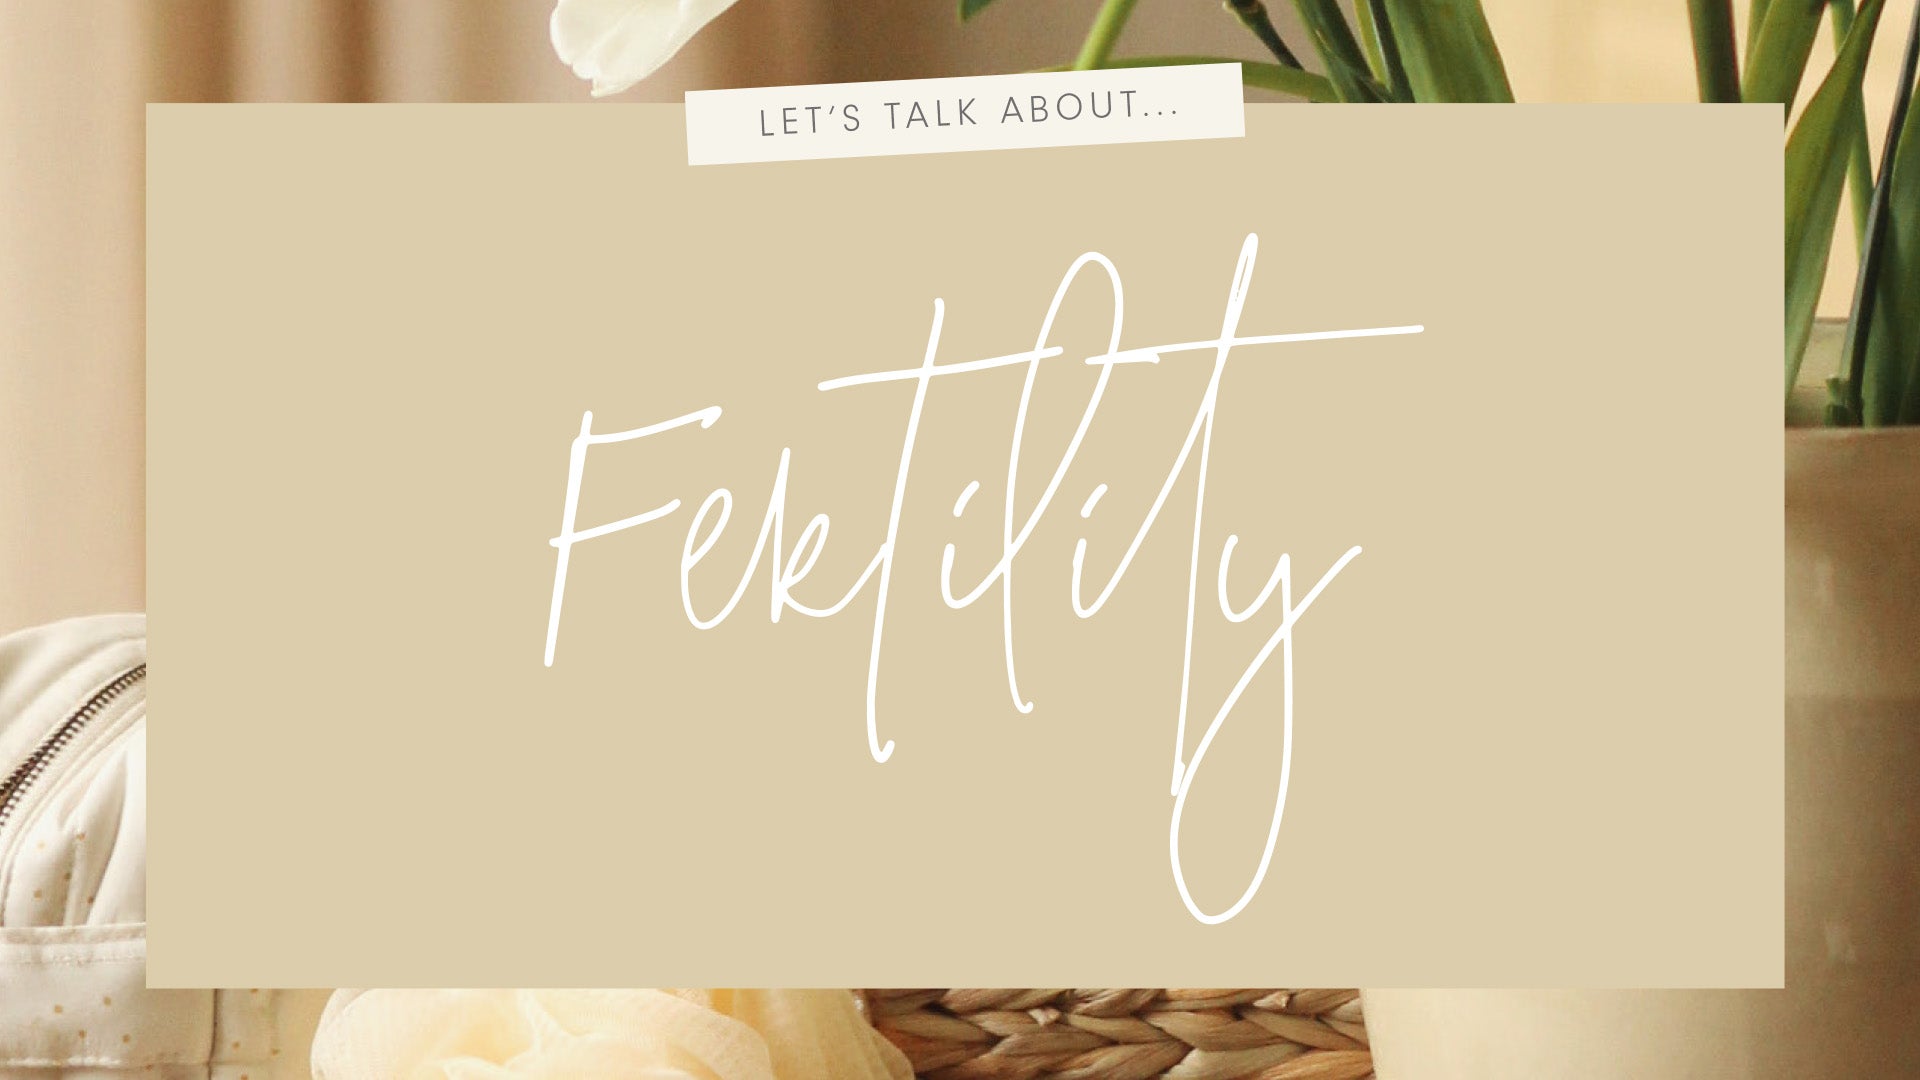 Fertility advice from Ellie, Co-host of the JelliePod and Victoria, founder of All About Embryology